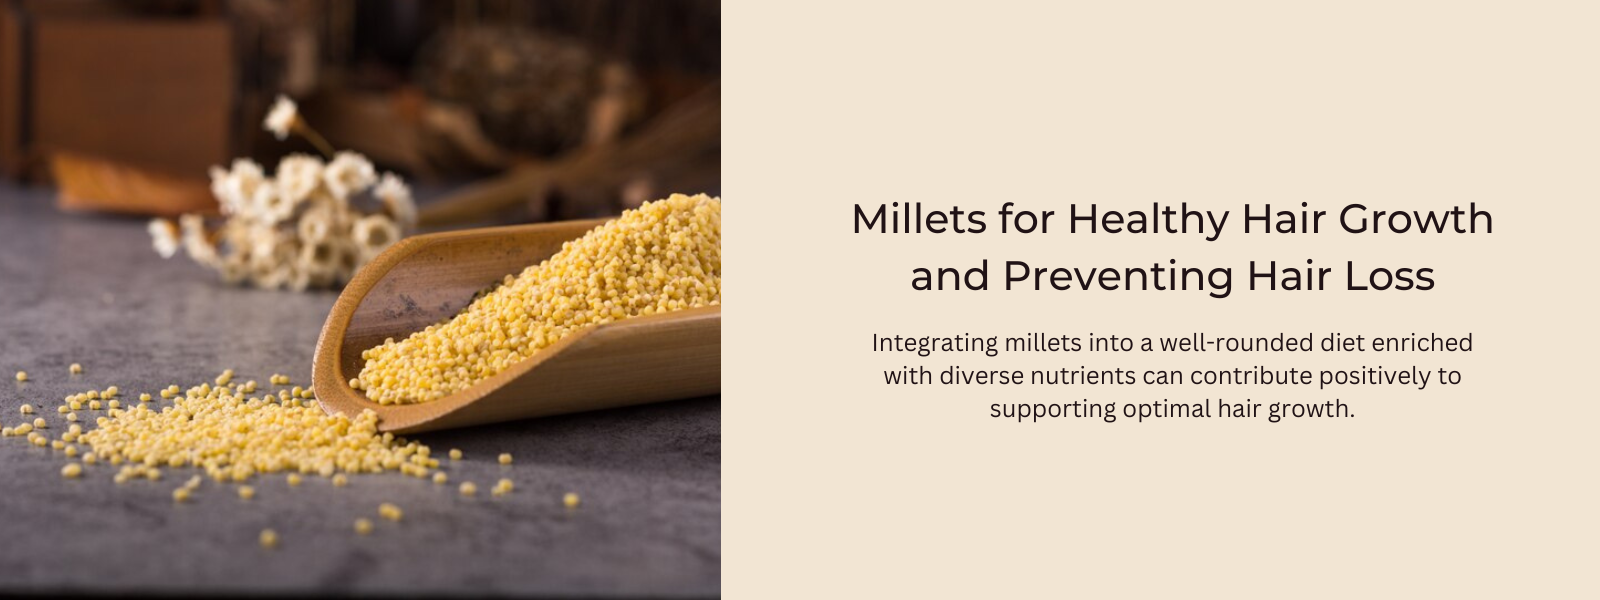 Millets for Healthy Hair Growth and Preventing Hair Loss